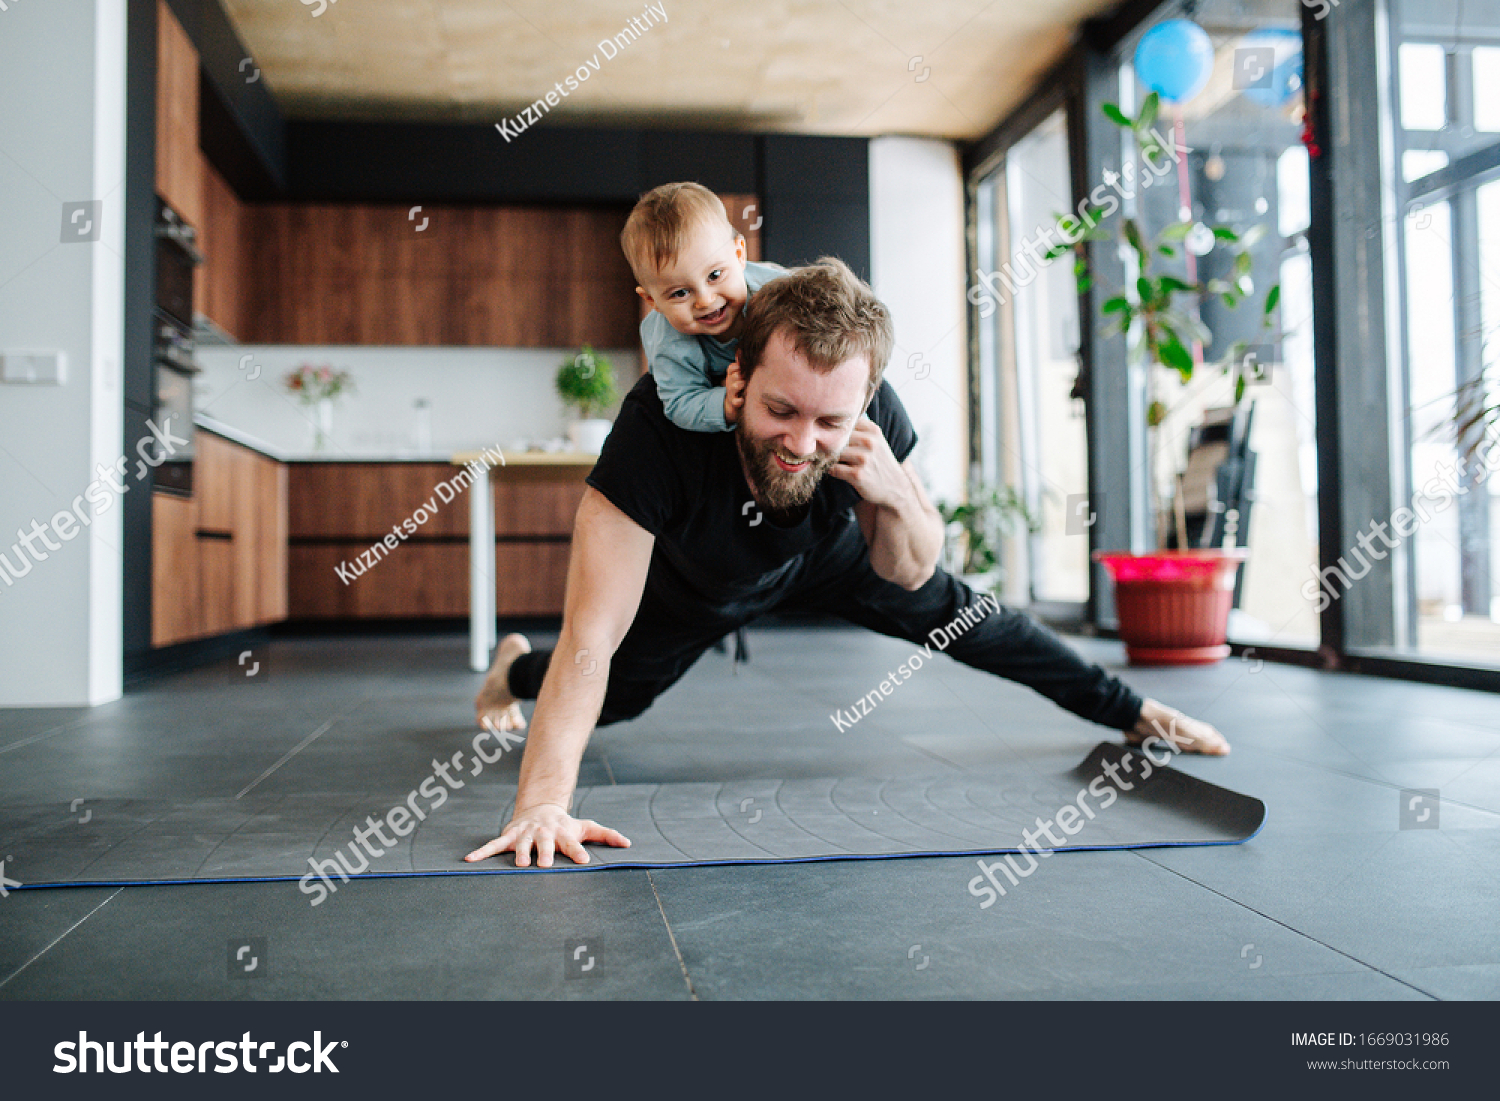 Father working out, doing single arm plank with his jolly infant baby riding on his neck. At home apartment. #1669031986